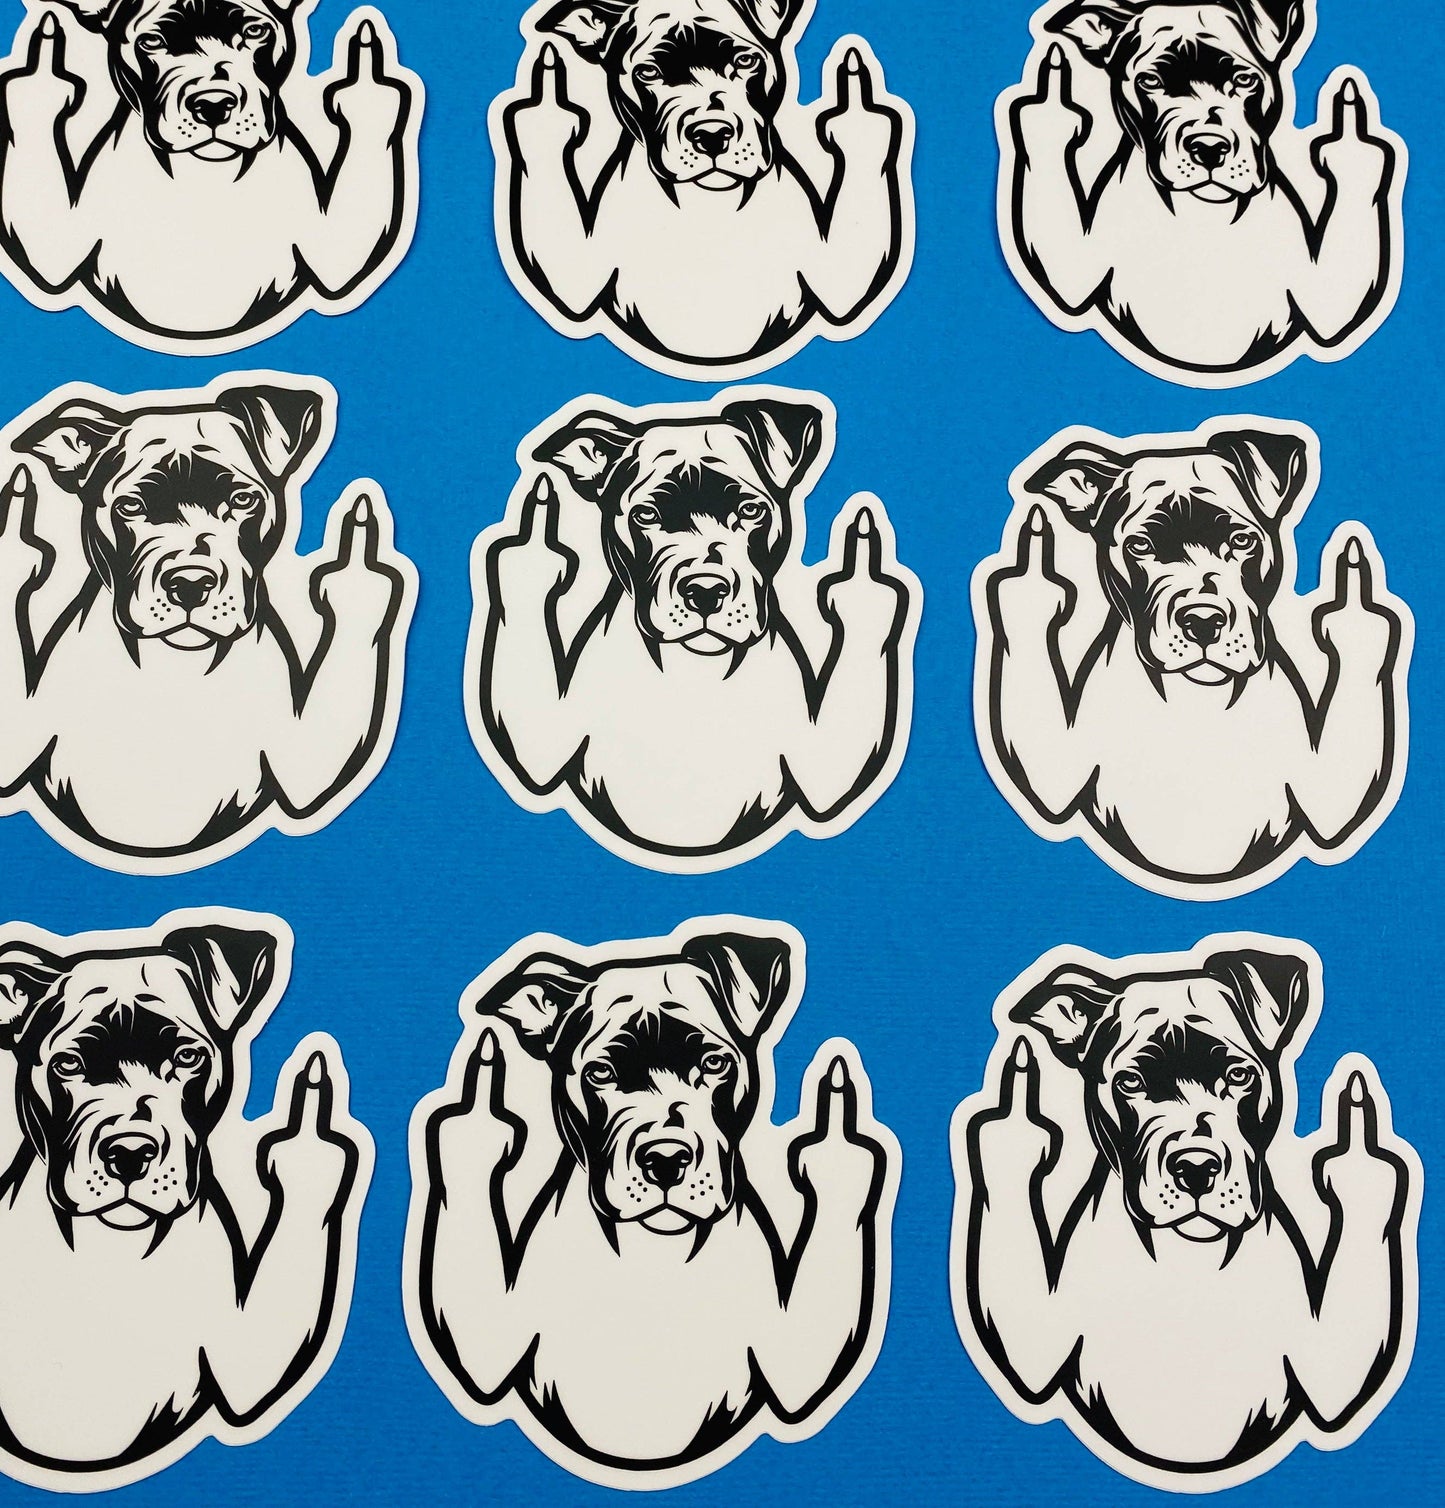 Sticker-Dog-07: Pitbull With Middle Fingers